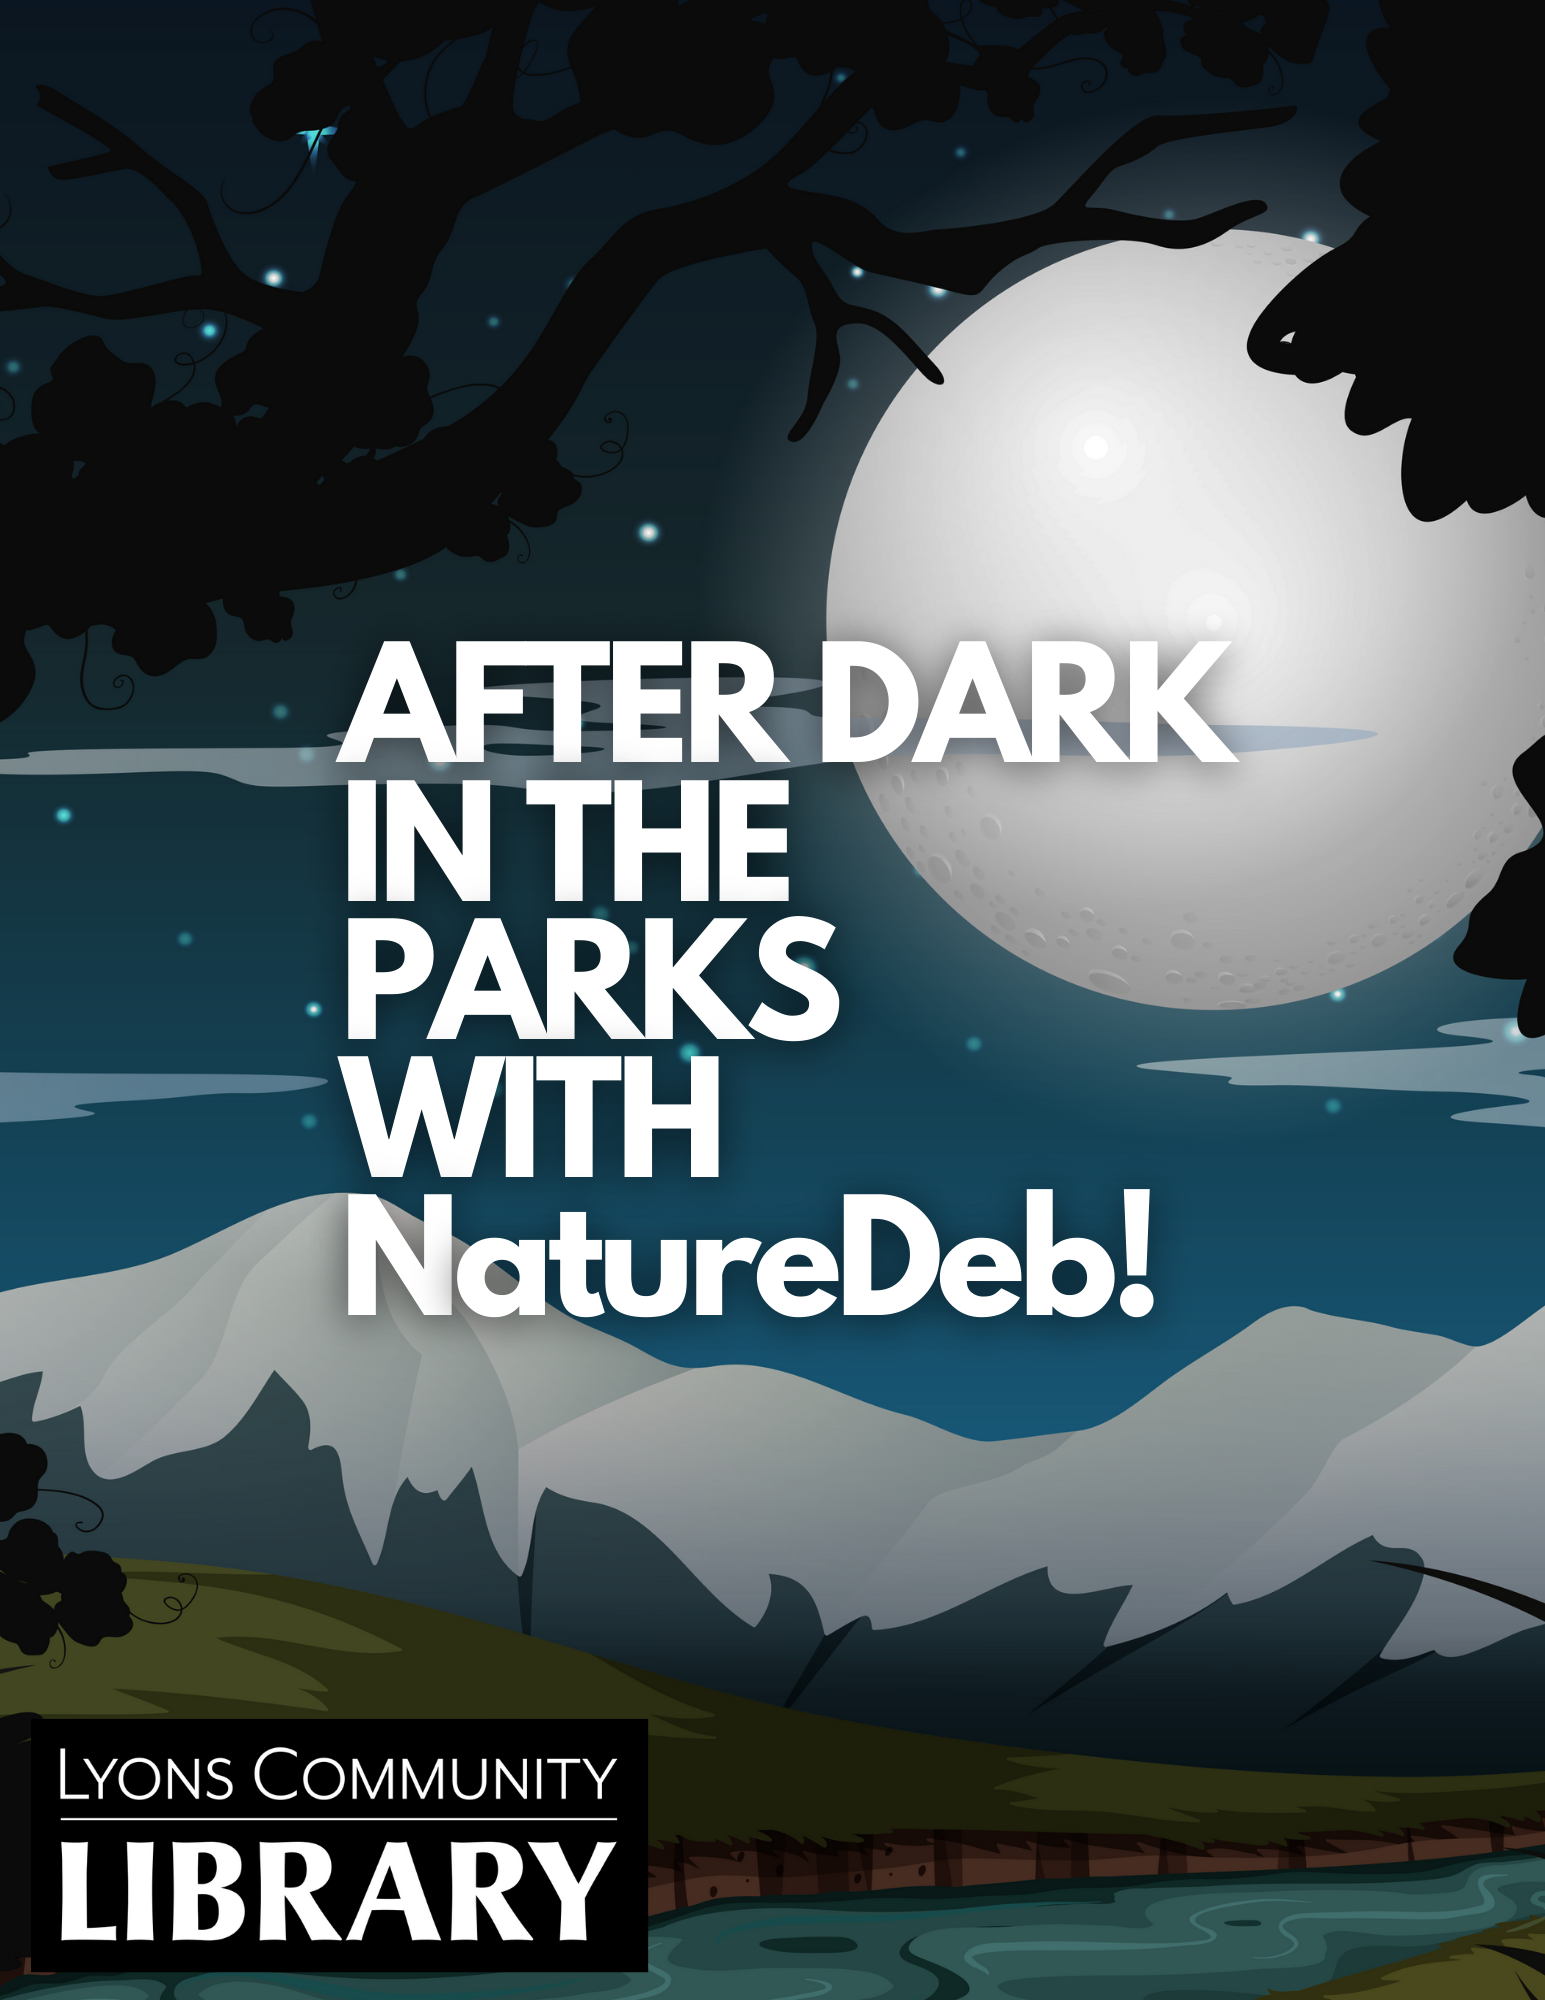 After Dark in the Parks with NatureDeb!